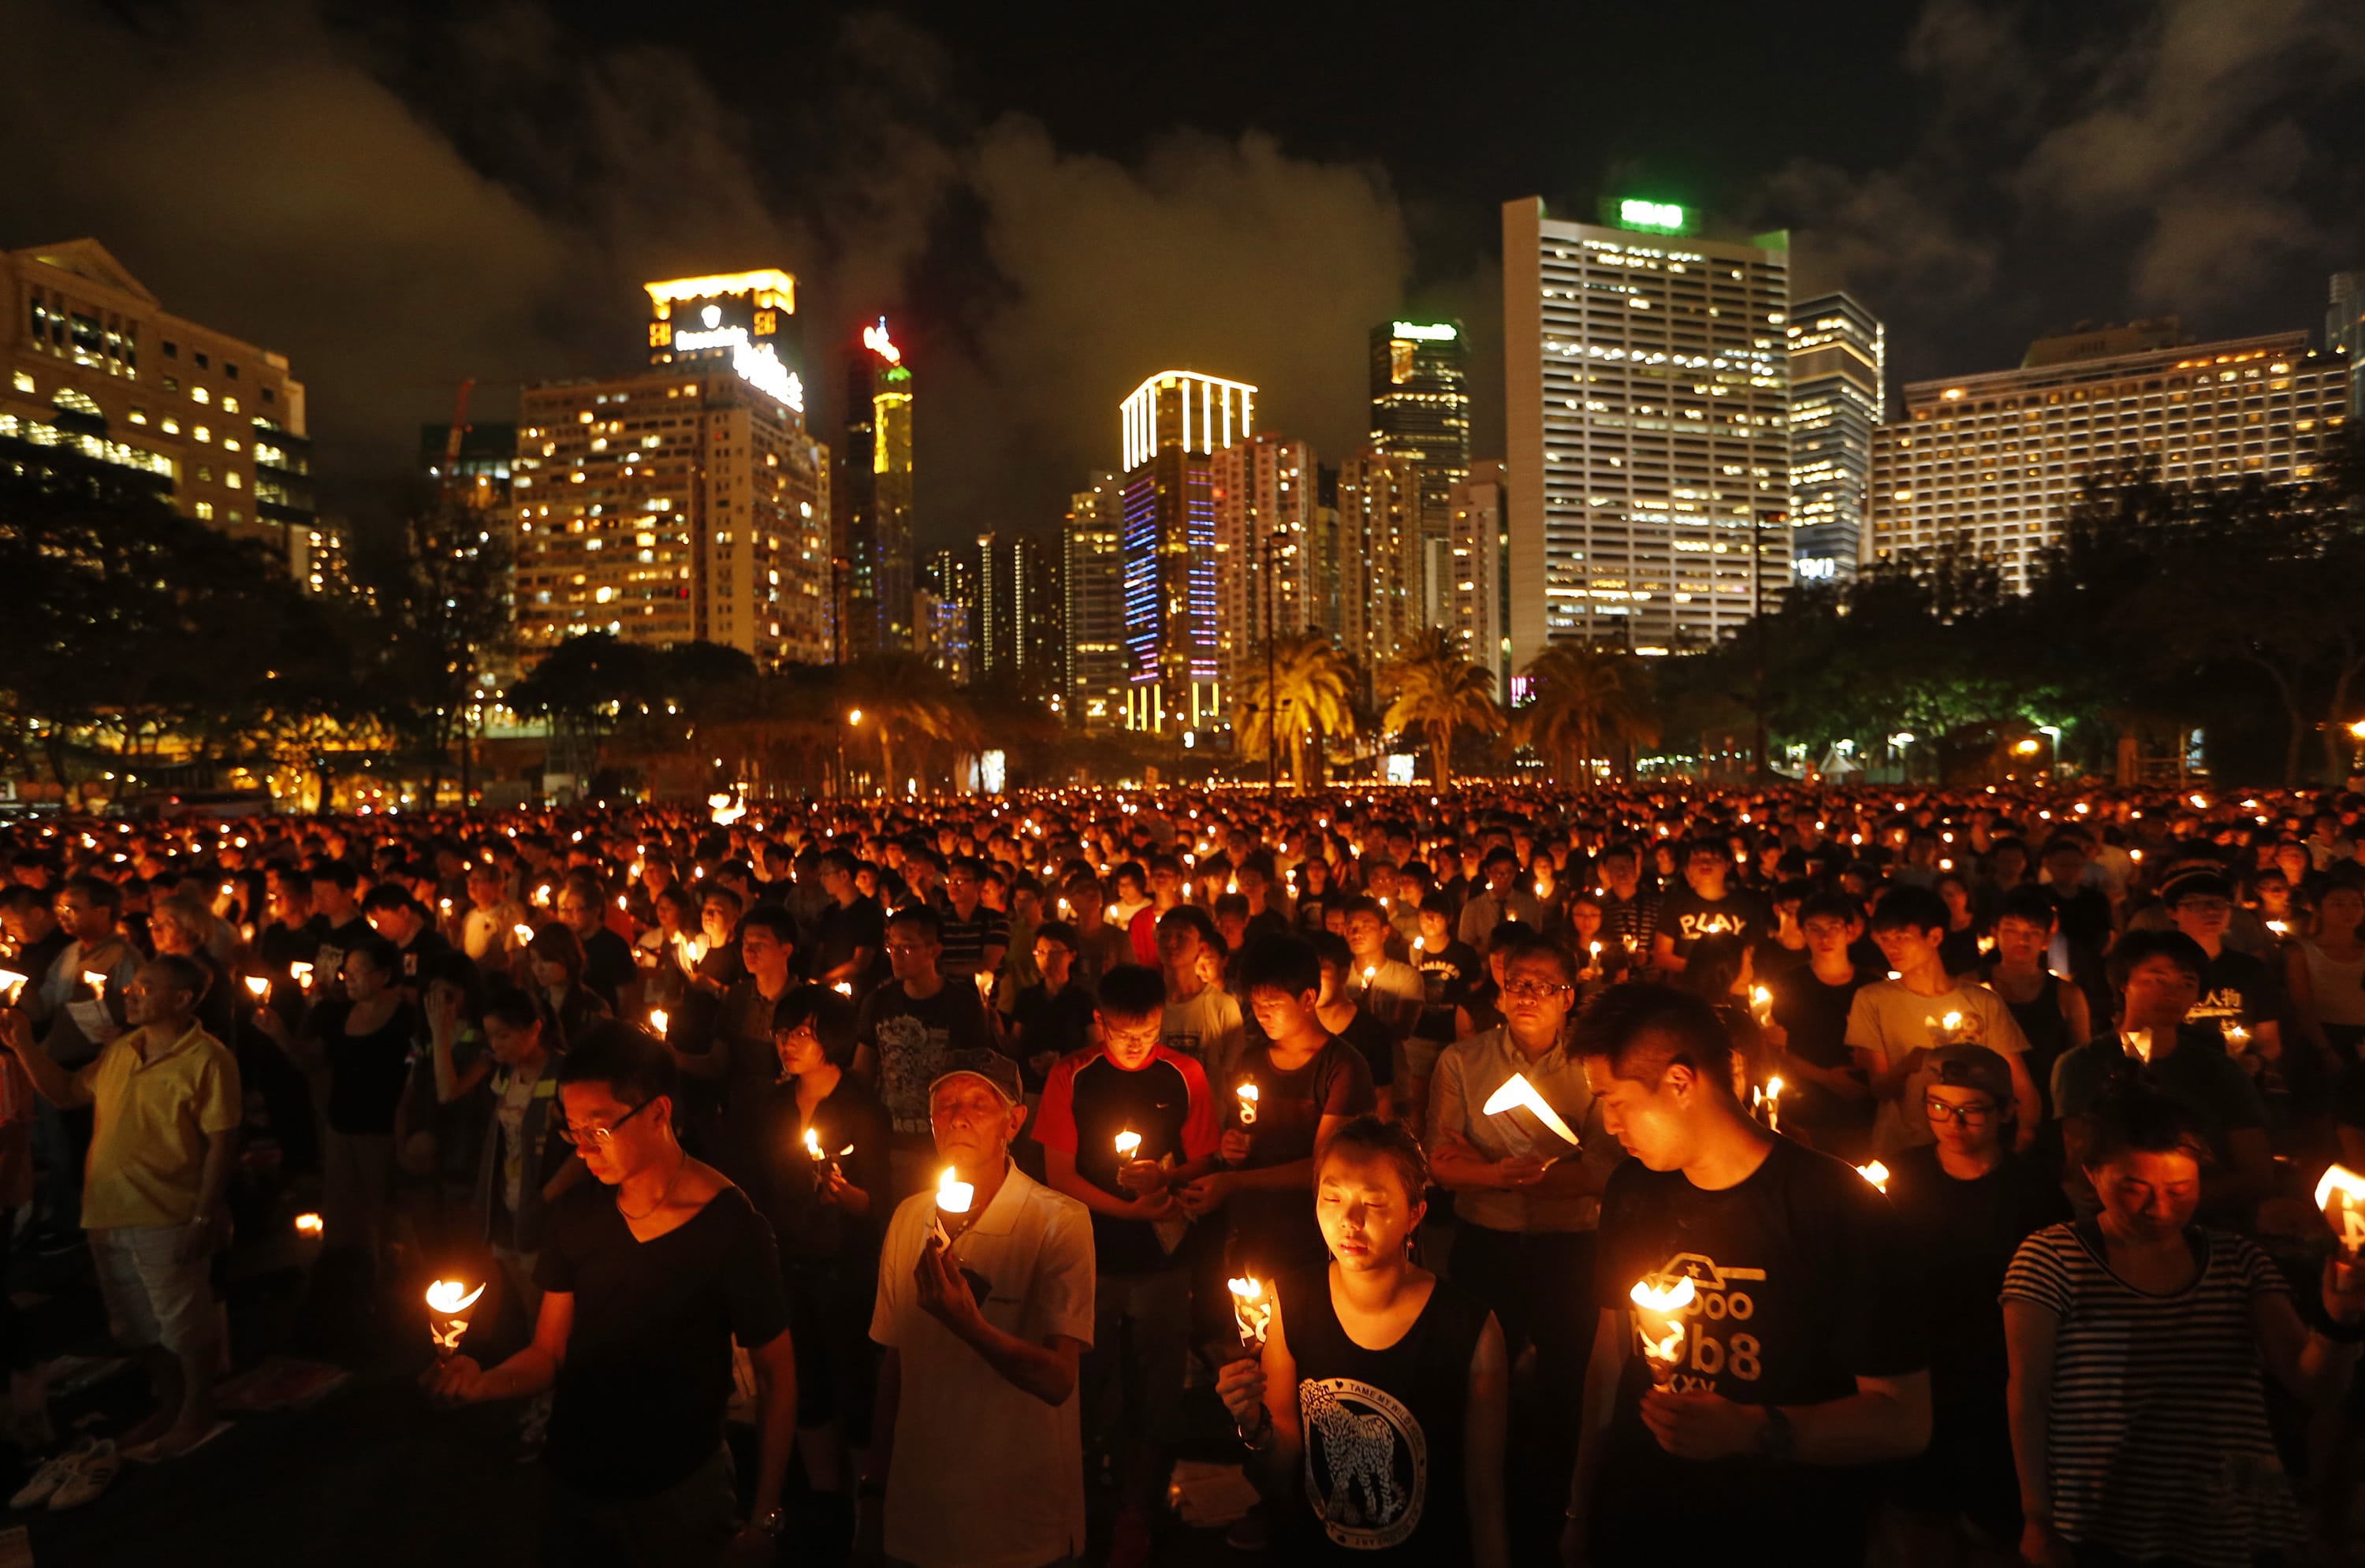 Thousands of people attend a candlelight vigil at Victoria Park in Hong Kong on Wednesday to mark the  anniversary of the June 4, 1989, military crackdown on the pro-democracy movement in Beijing.